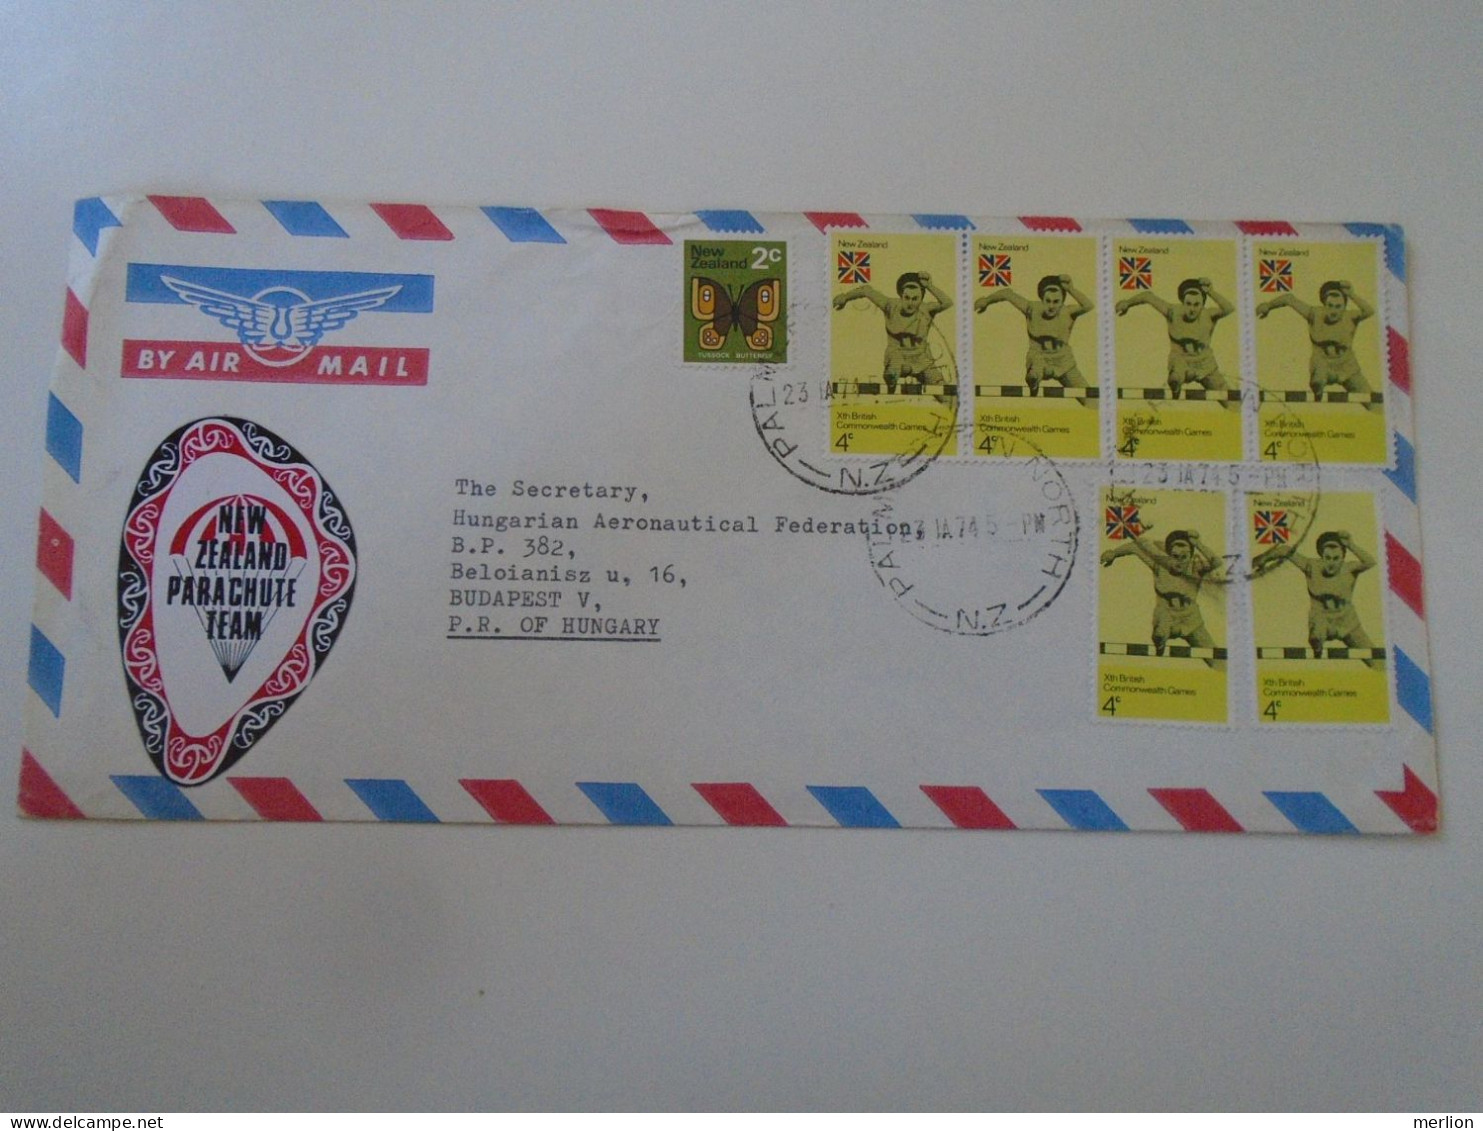 D198177   New Zealand  Airmail  Cover 1974  New Zealand Parachute Team - Palmerston North  - Sent To Hungary - Covers & Documents